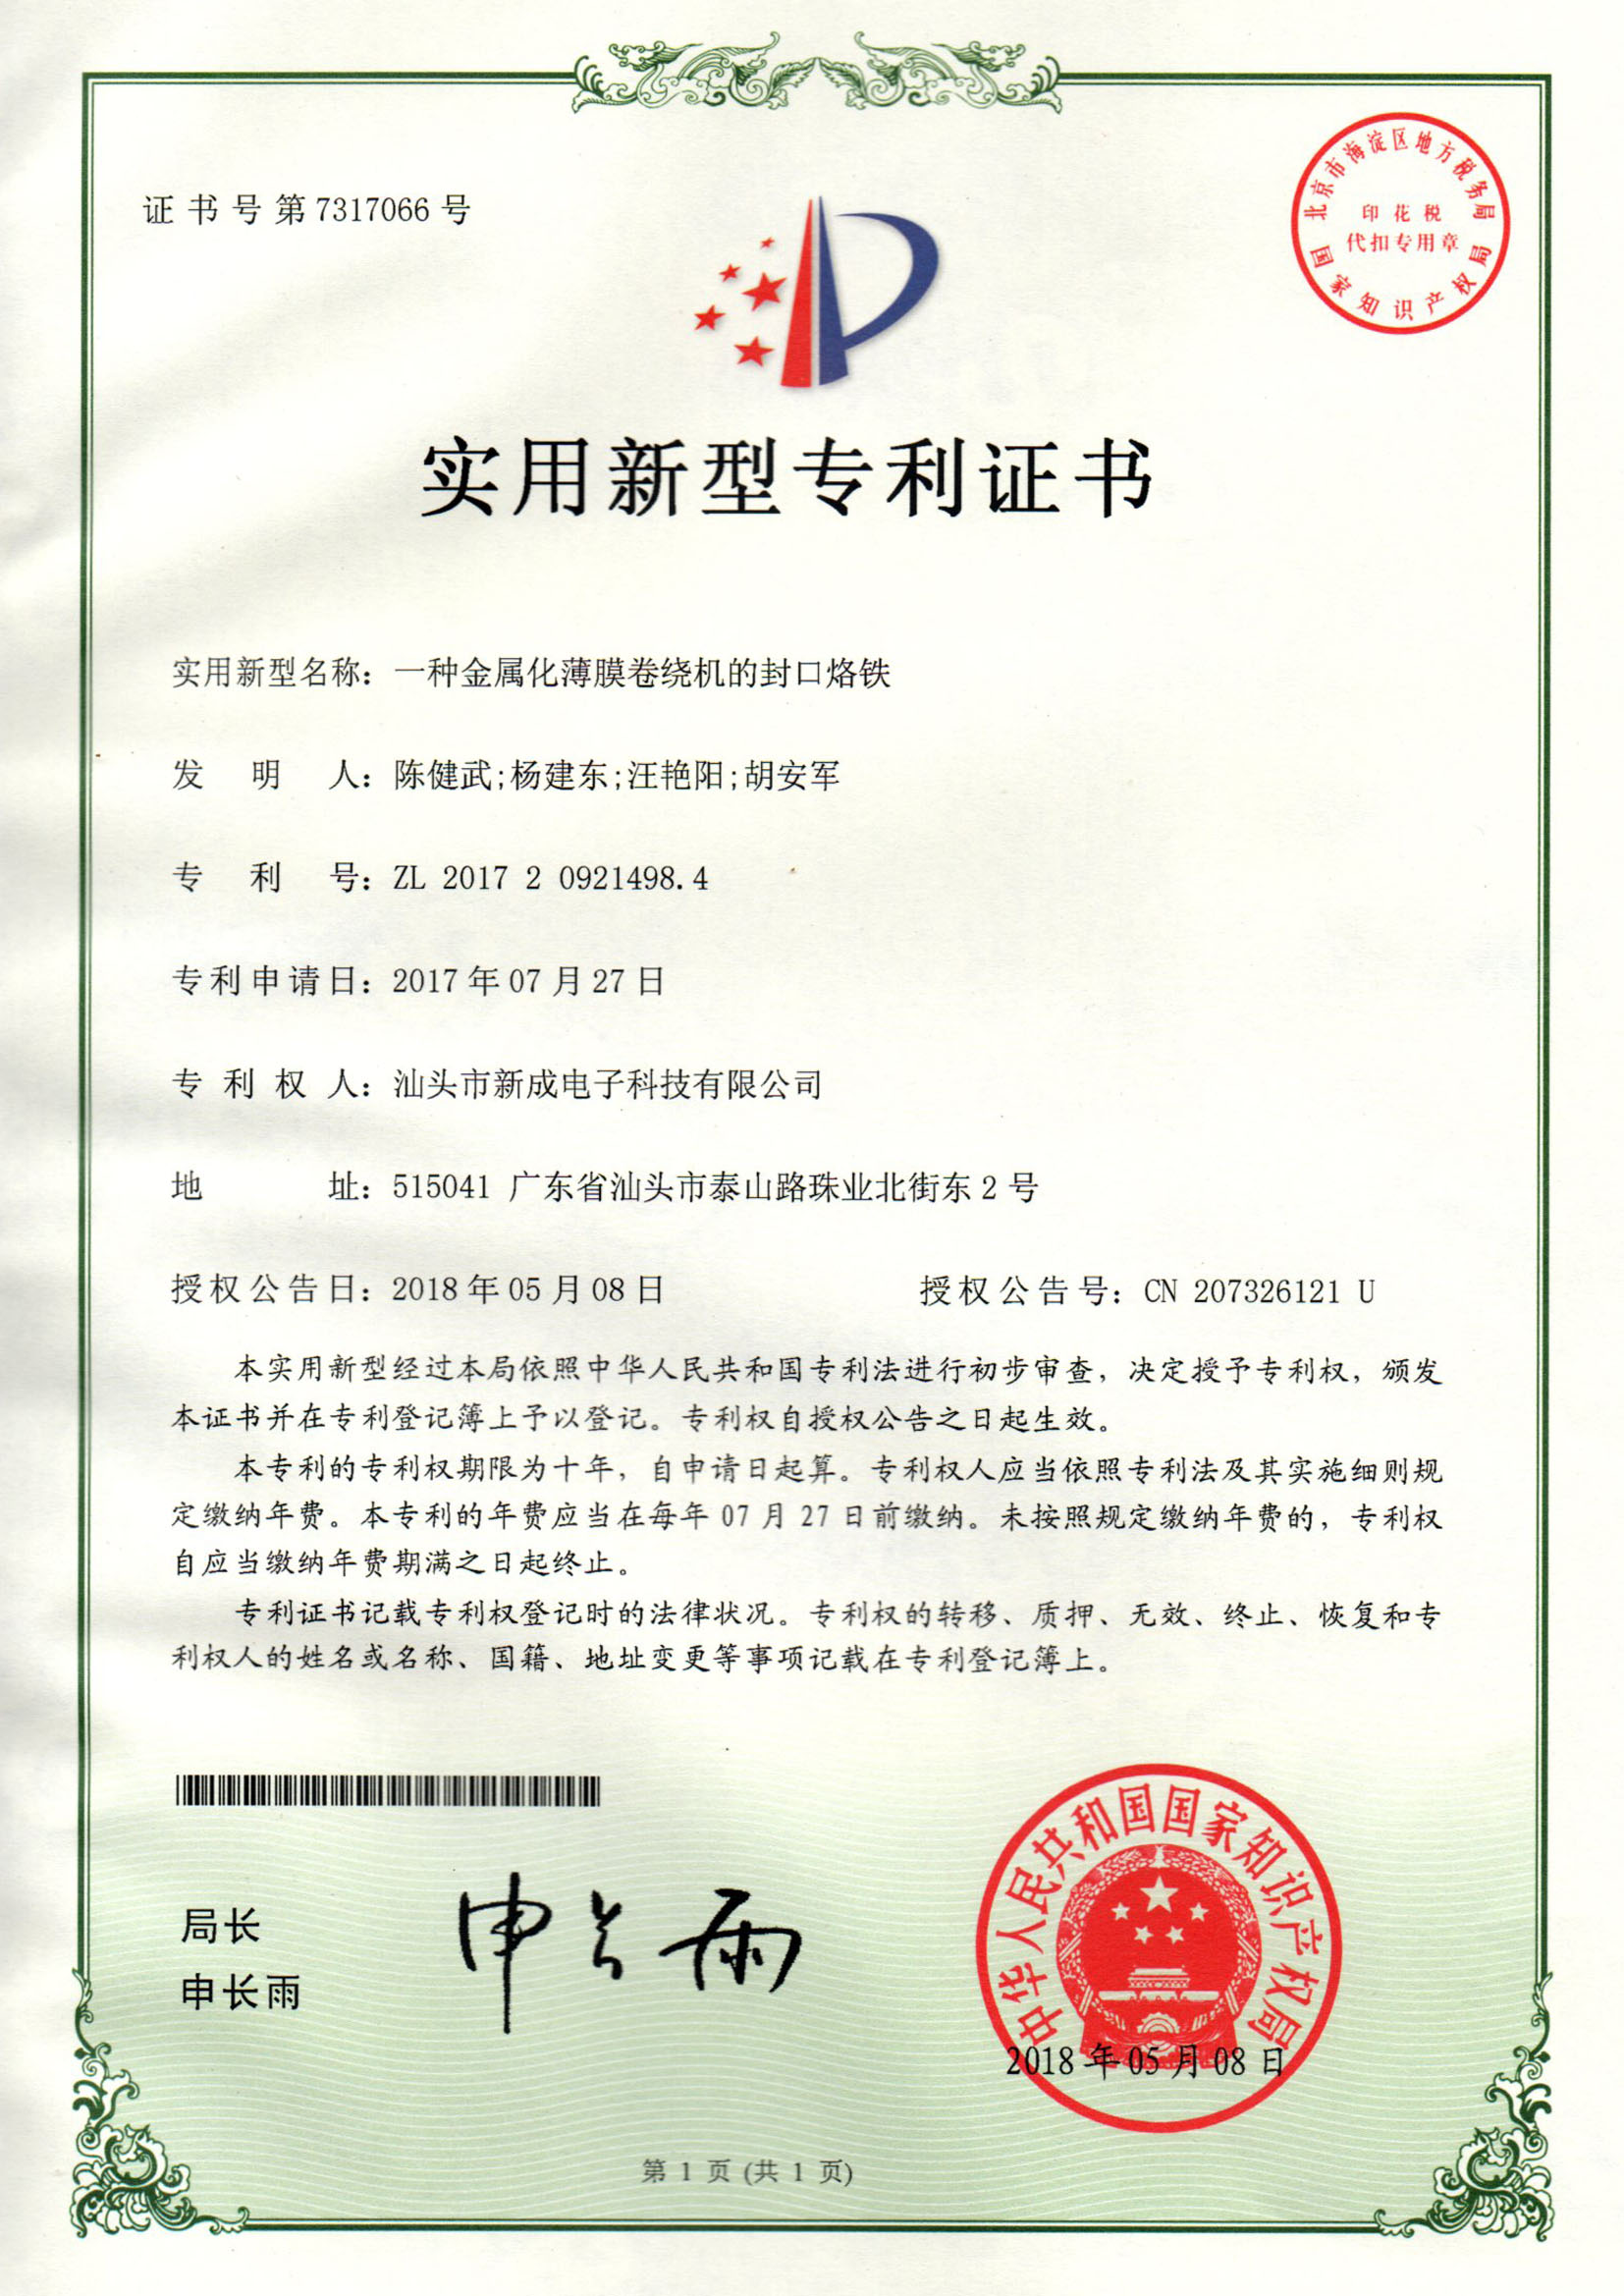 A kind of sealing block for metalized winding machine) Utility model patent certificate 20180508